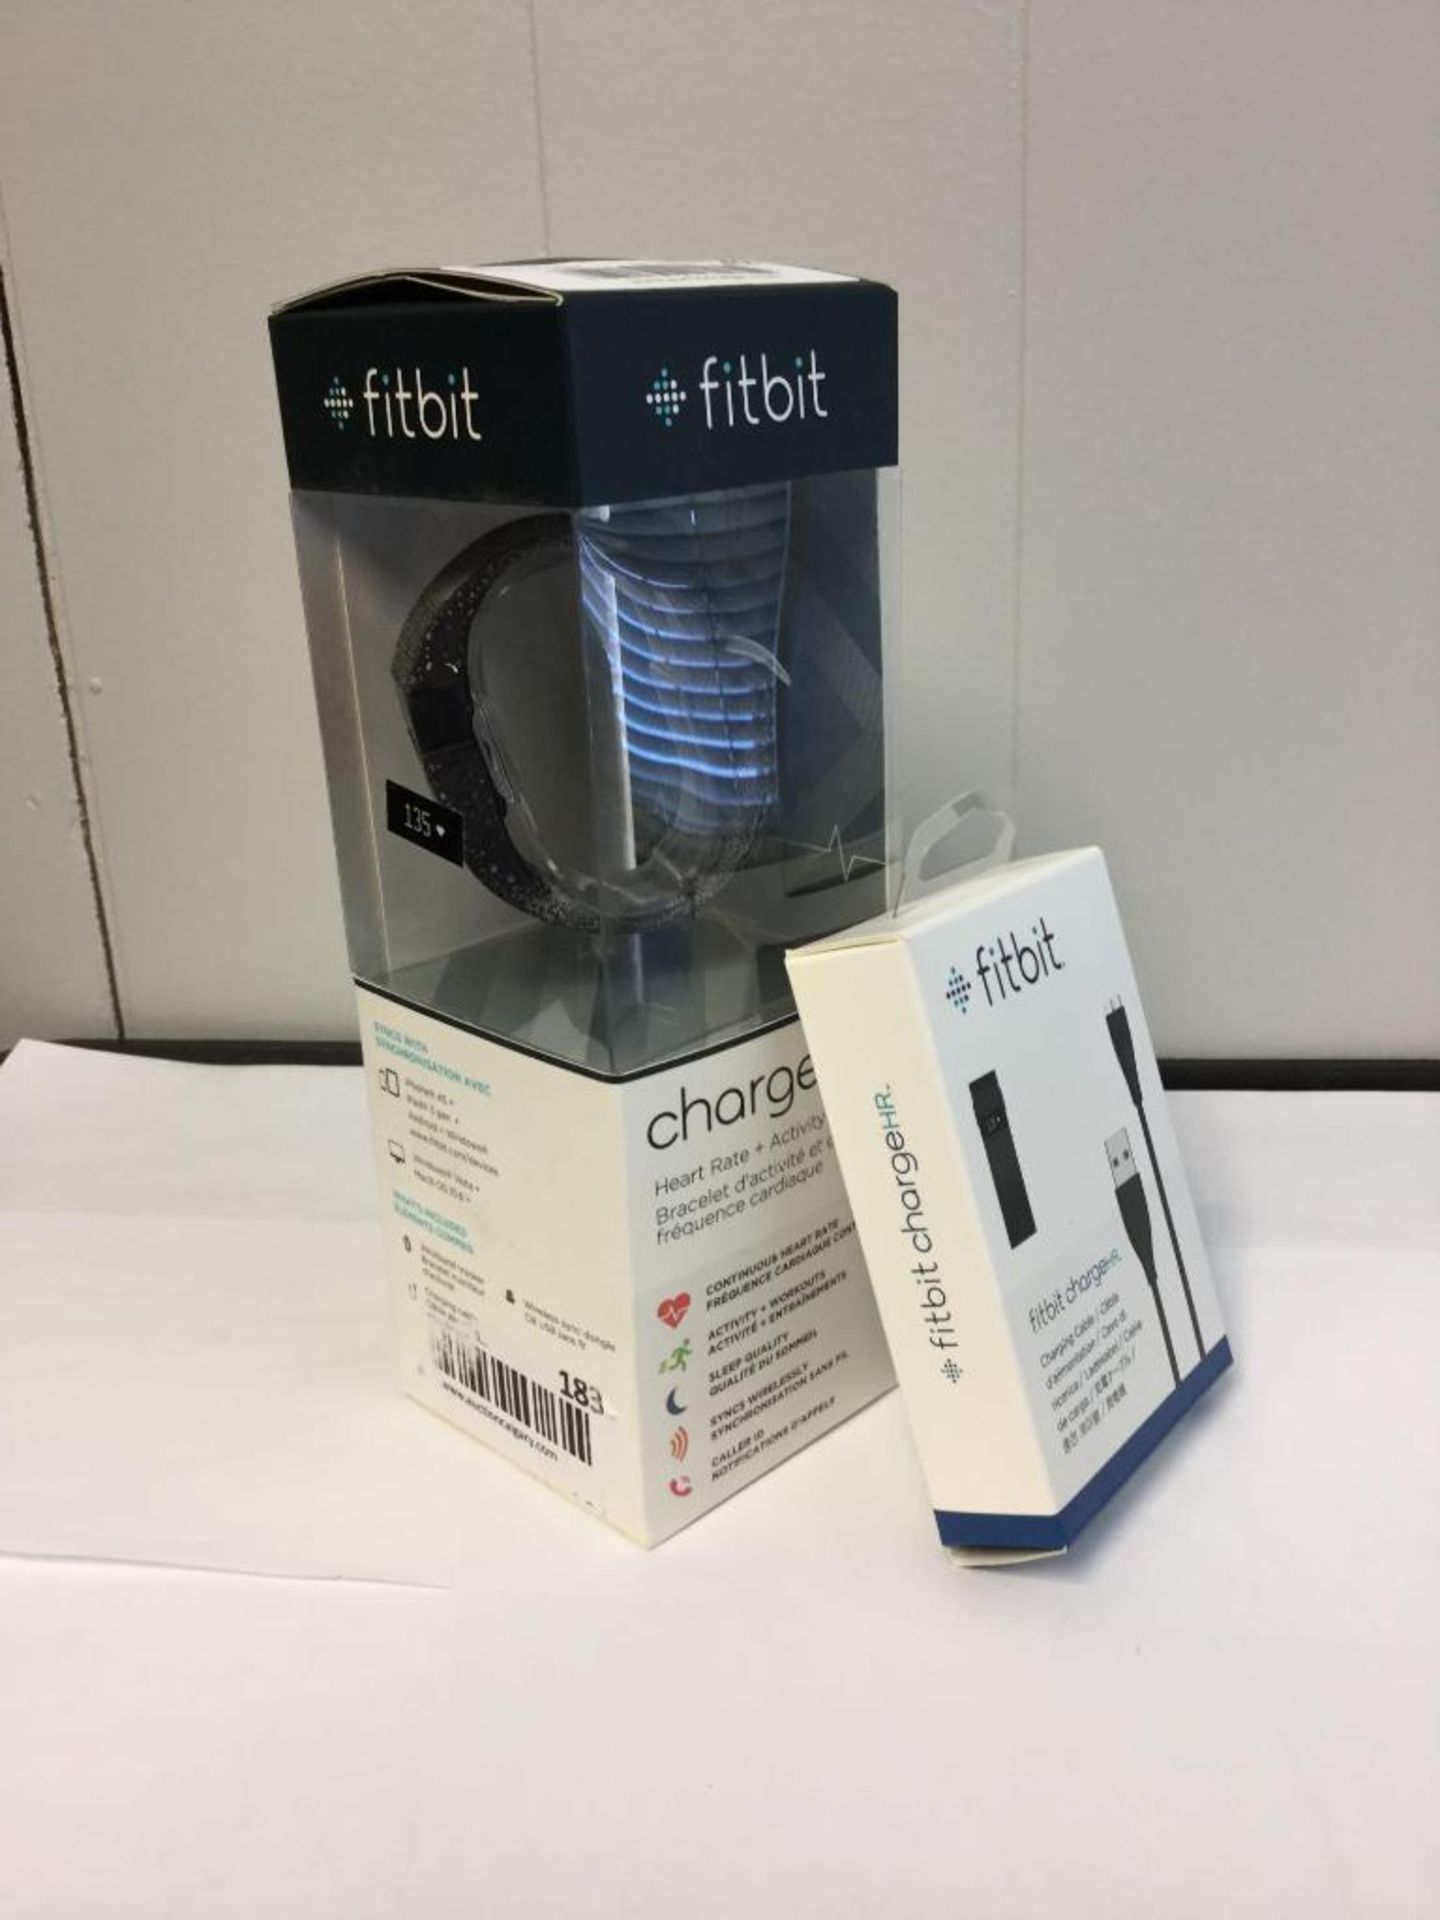 Fit bit HR Fitness Monitor with extra Charger